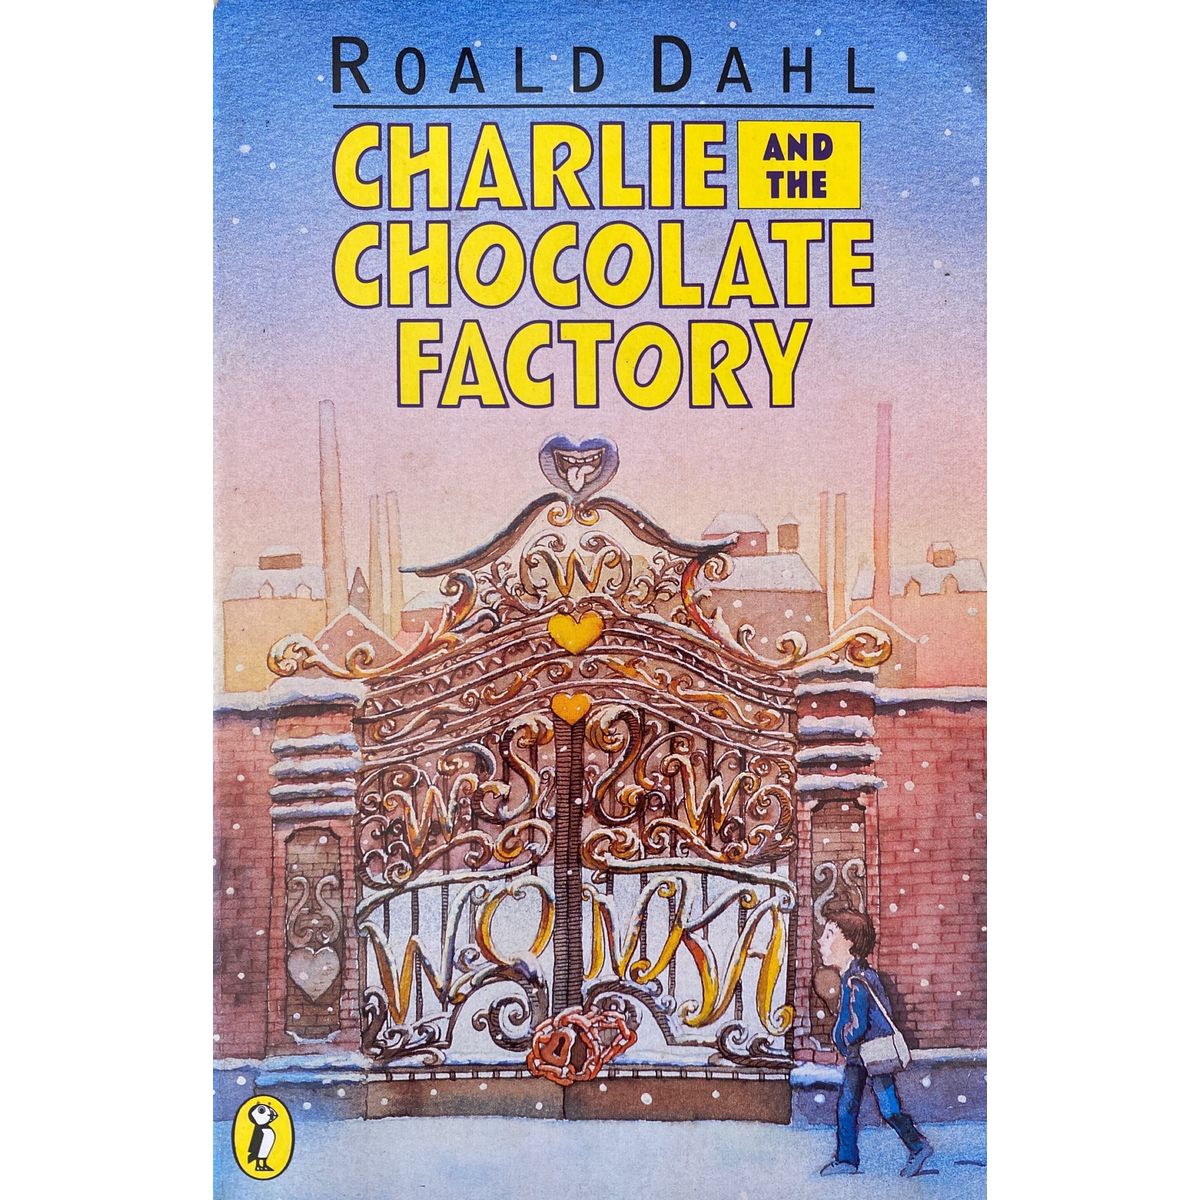 ISBN: 9780141365374 - Charlie and the Chocolate Factory by Roald Dahl [2016]